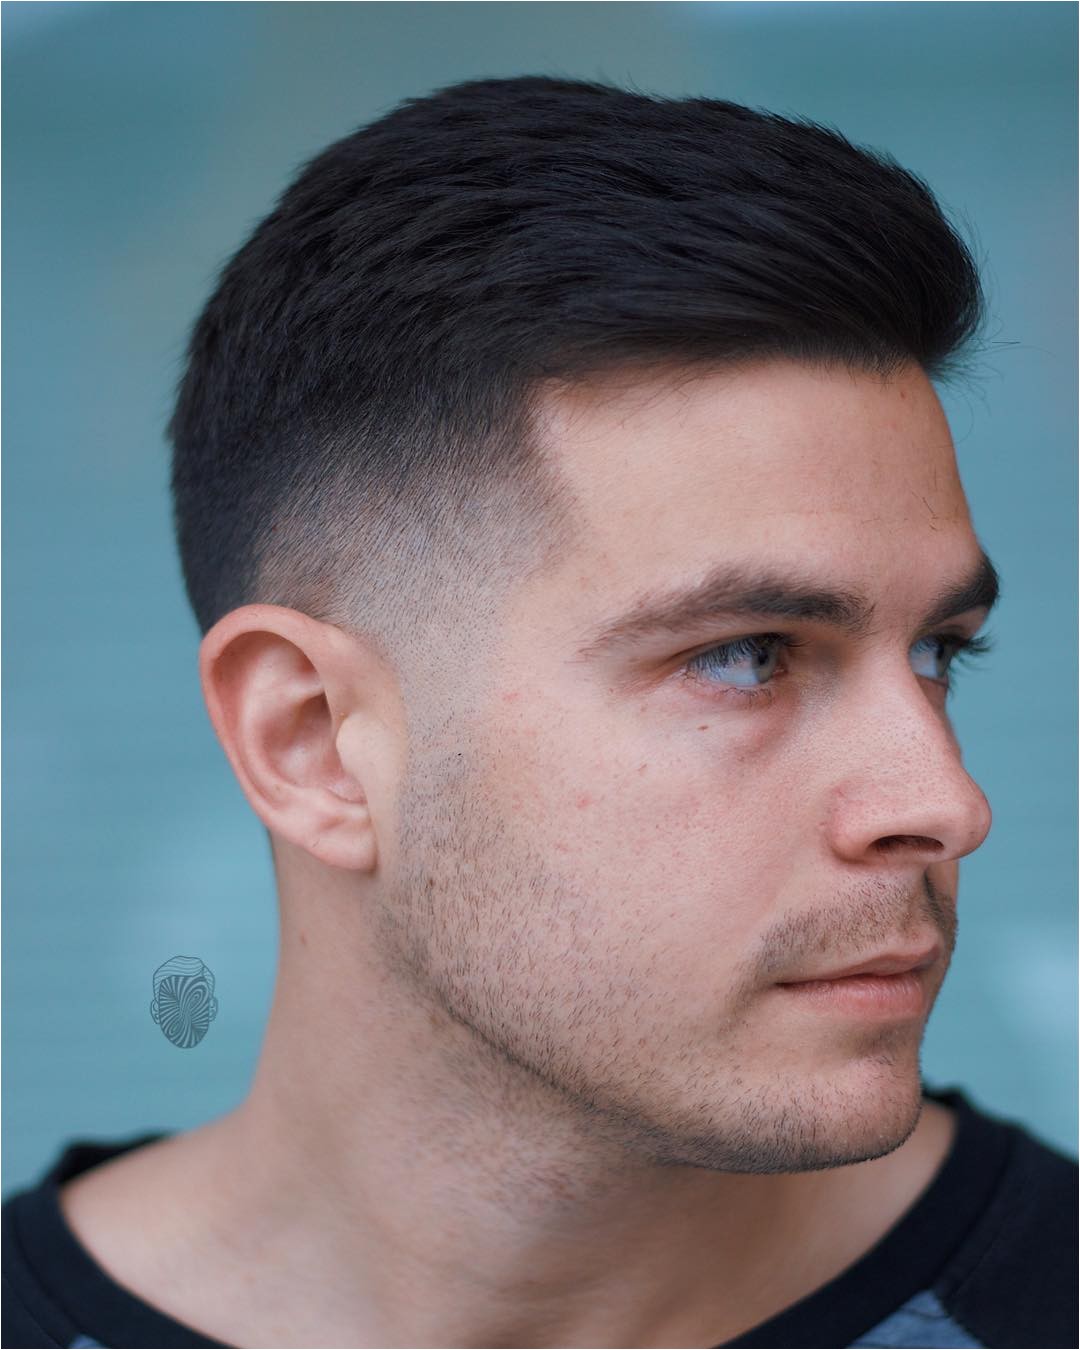 Hairstyles for Short Haired Men Short Hairstyles for Men 2018